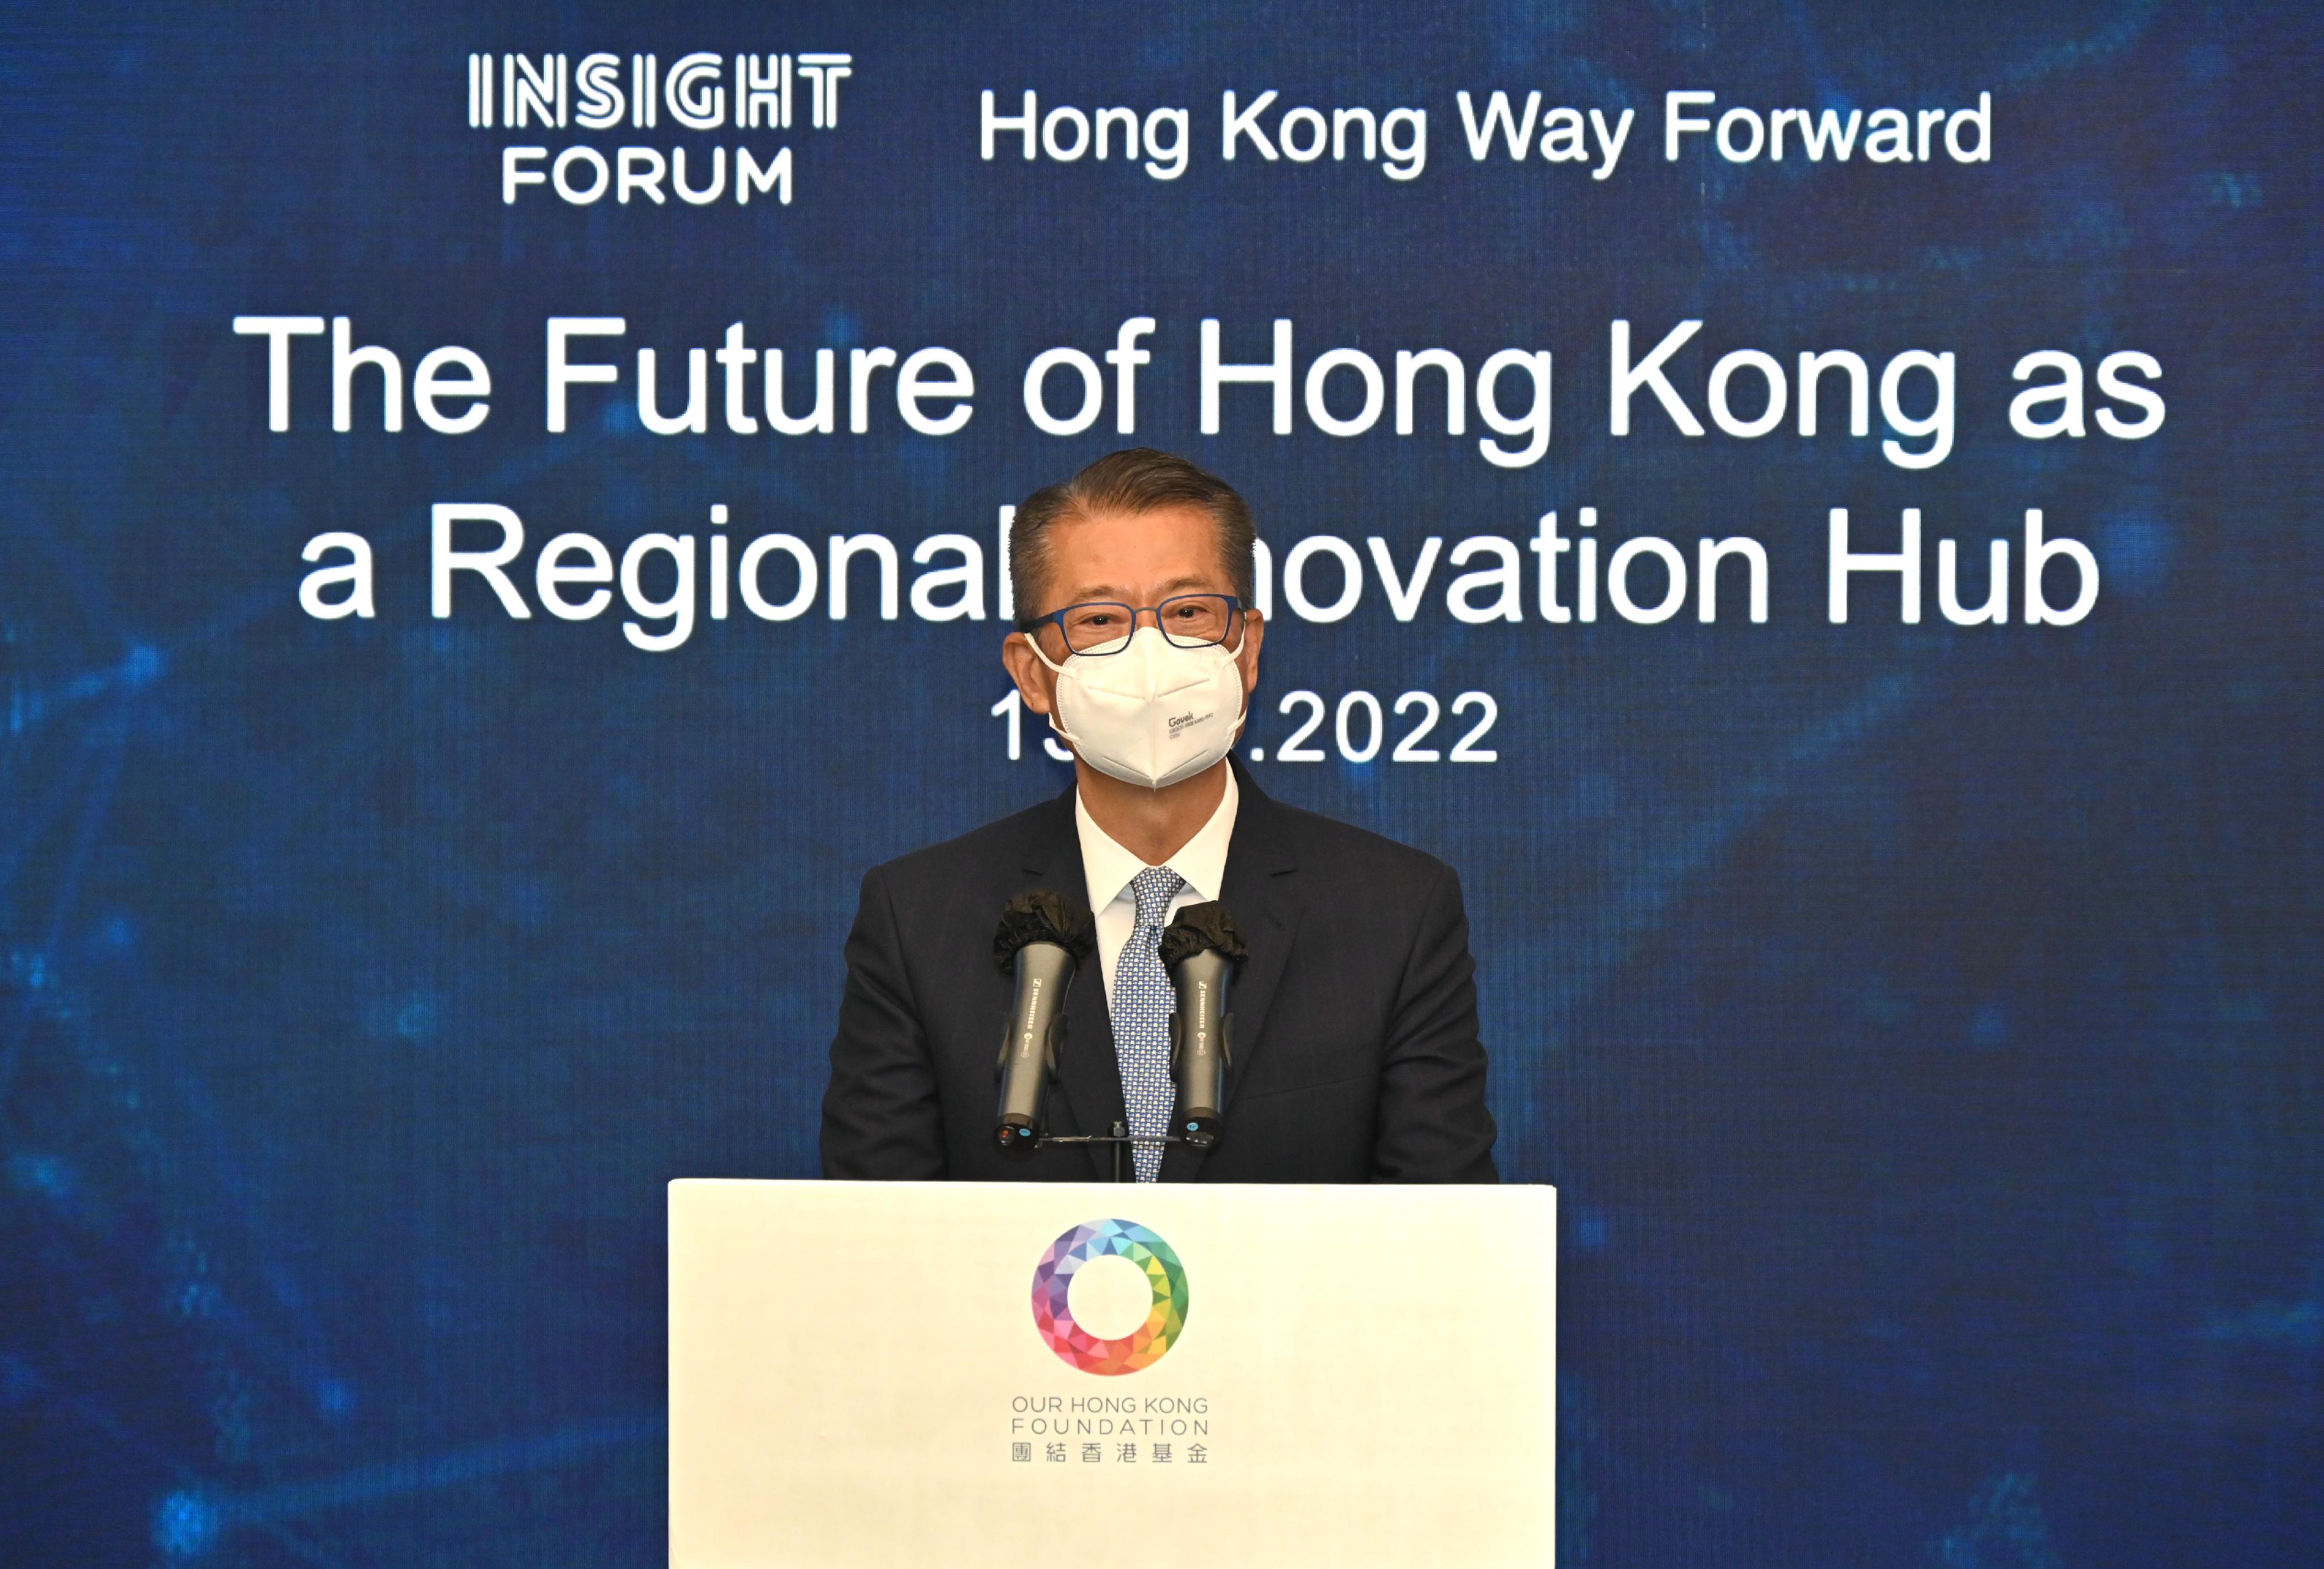 The Financial Secretary, Mr Paul Chan, speaks at the Insight Forum: Hong Kong Way Forward - "The Future of Hong Kong as a Regional Innovation Hub" held by the Our Hong Kong Foundation today (September 13).